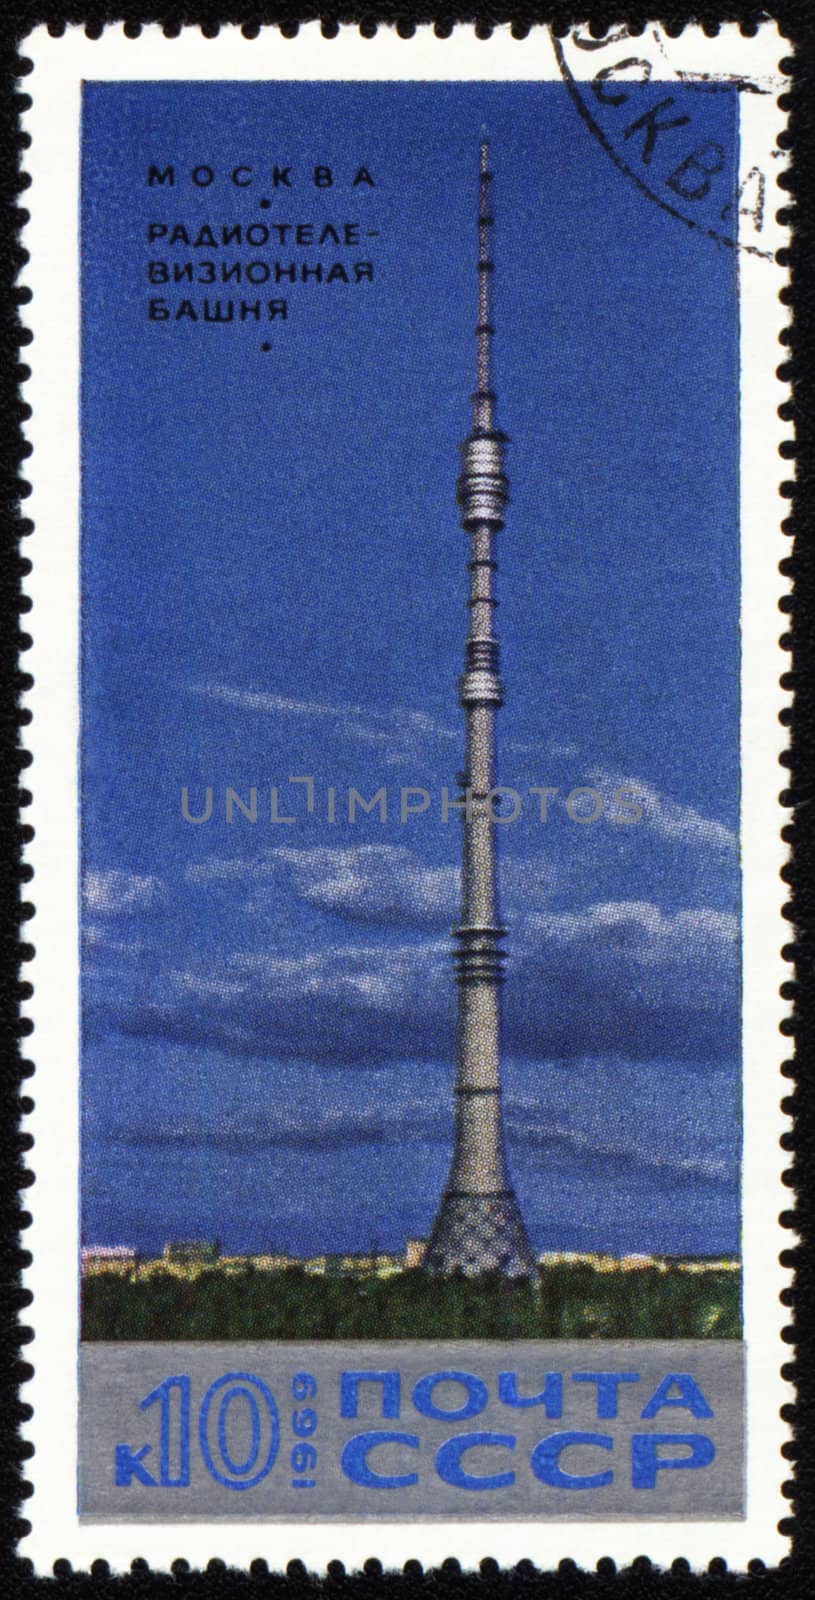 USSR - CIRCA 1969: stamp printed in USSR shows Ostankino TV Tower in Moscow, circa 1969